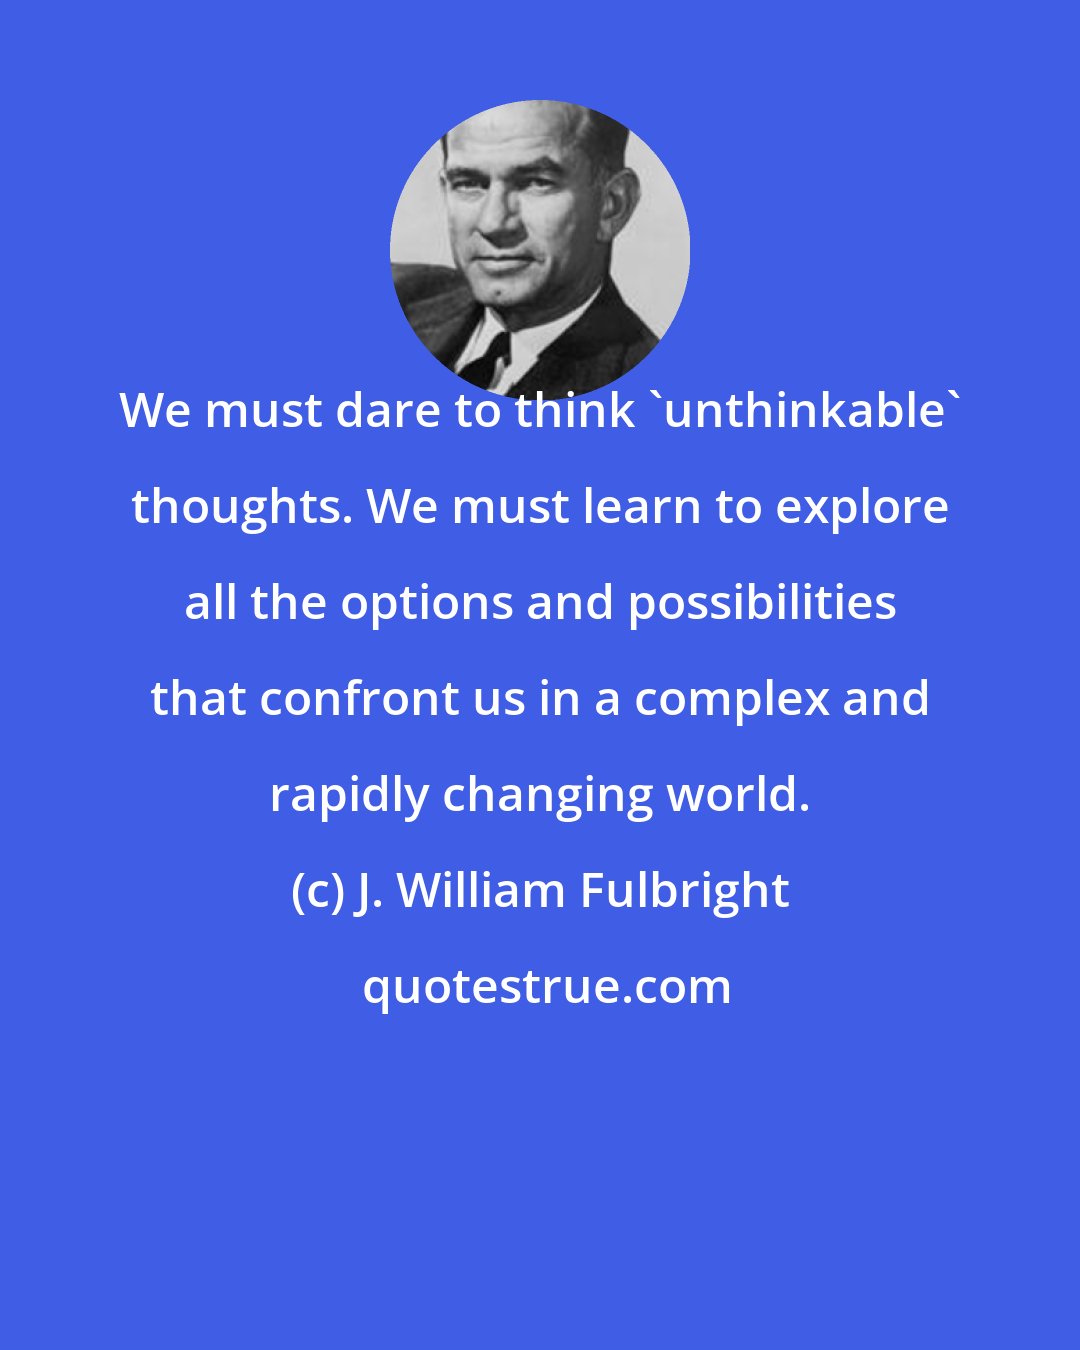 J. William Fulbright: We must dare to think 'unthinkable' thoughts. We must learn to explore all the options and possibilities that confront us in a complex and rapidly changing world.